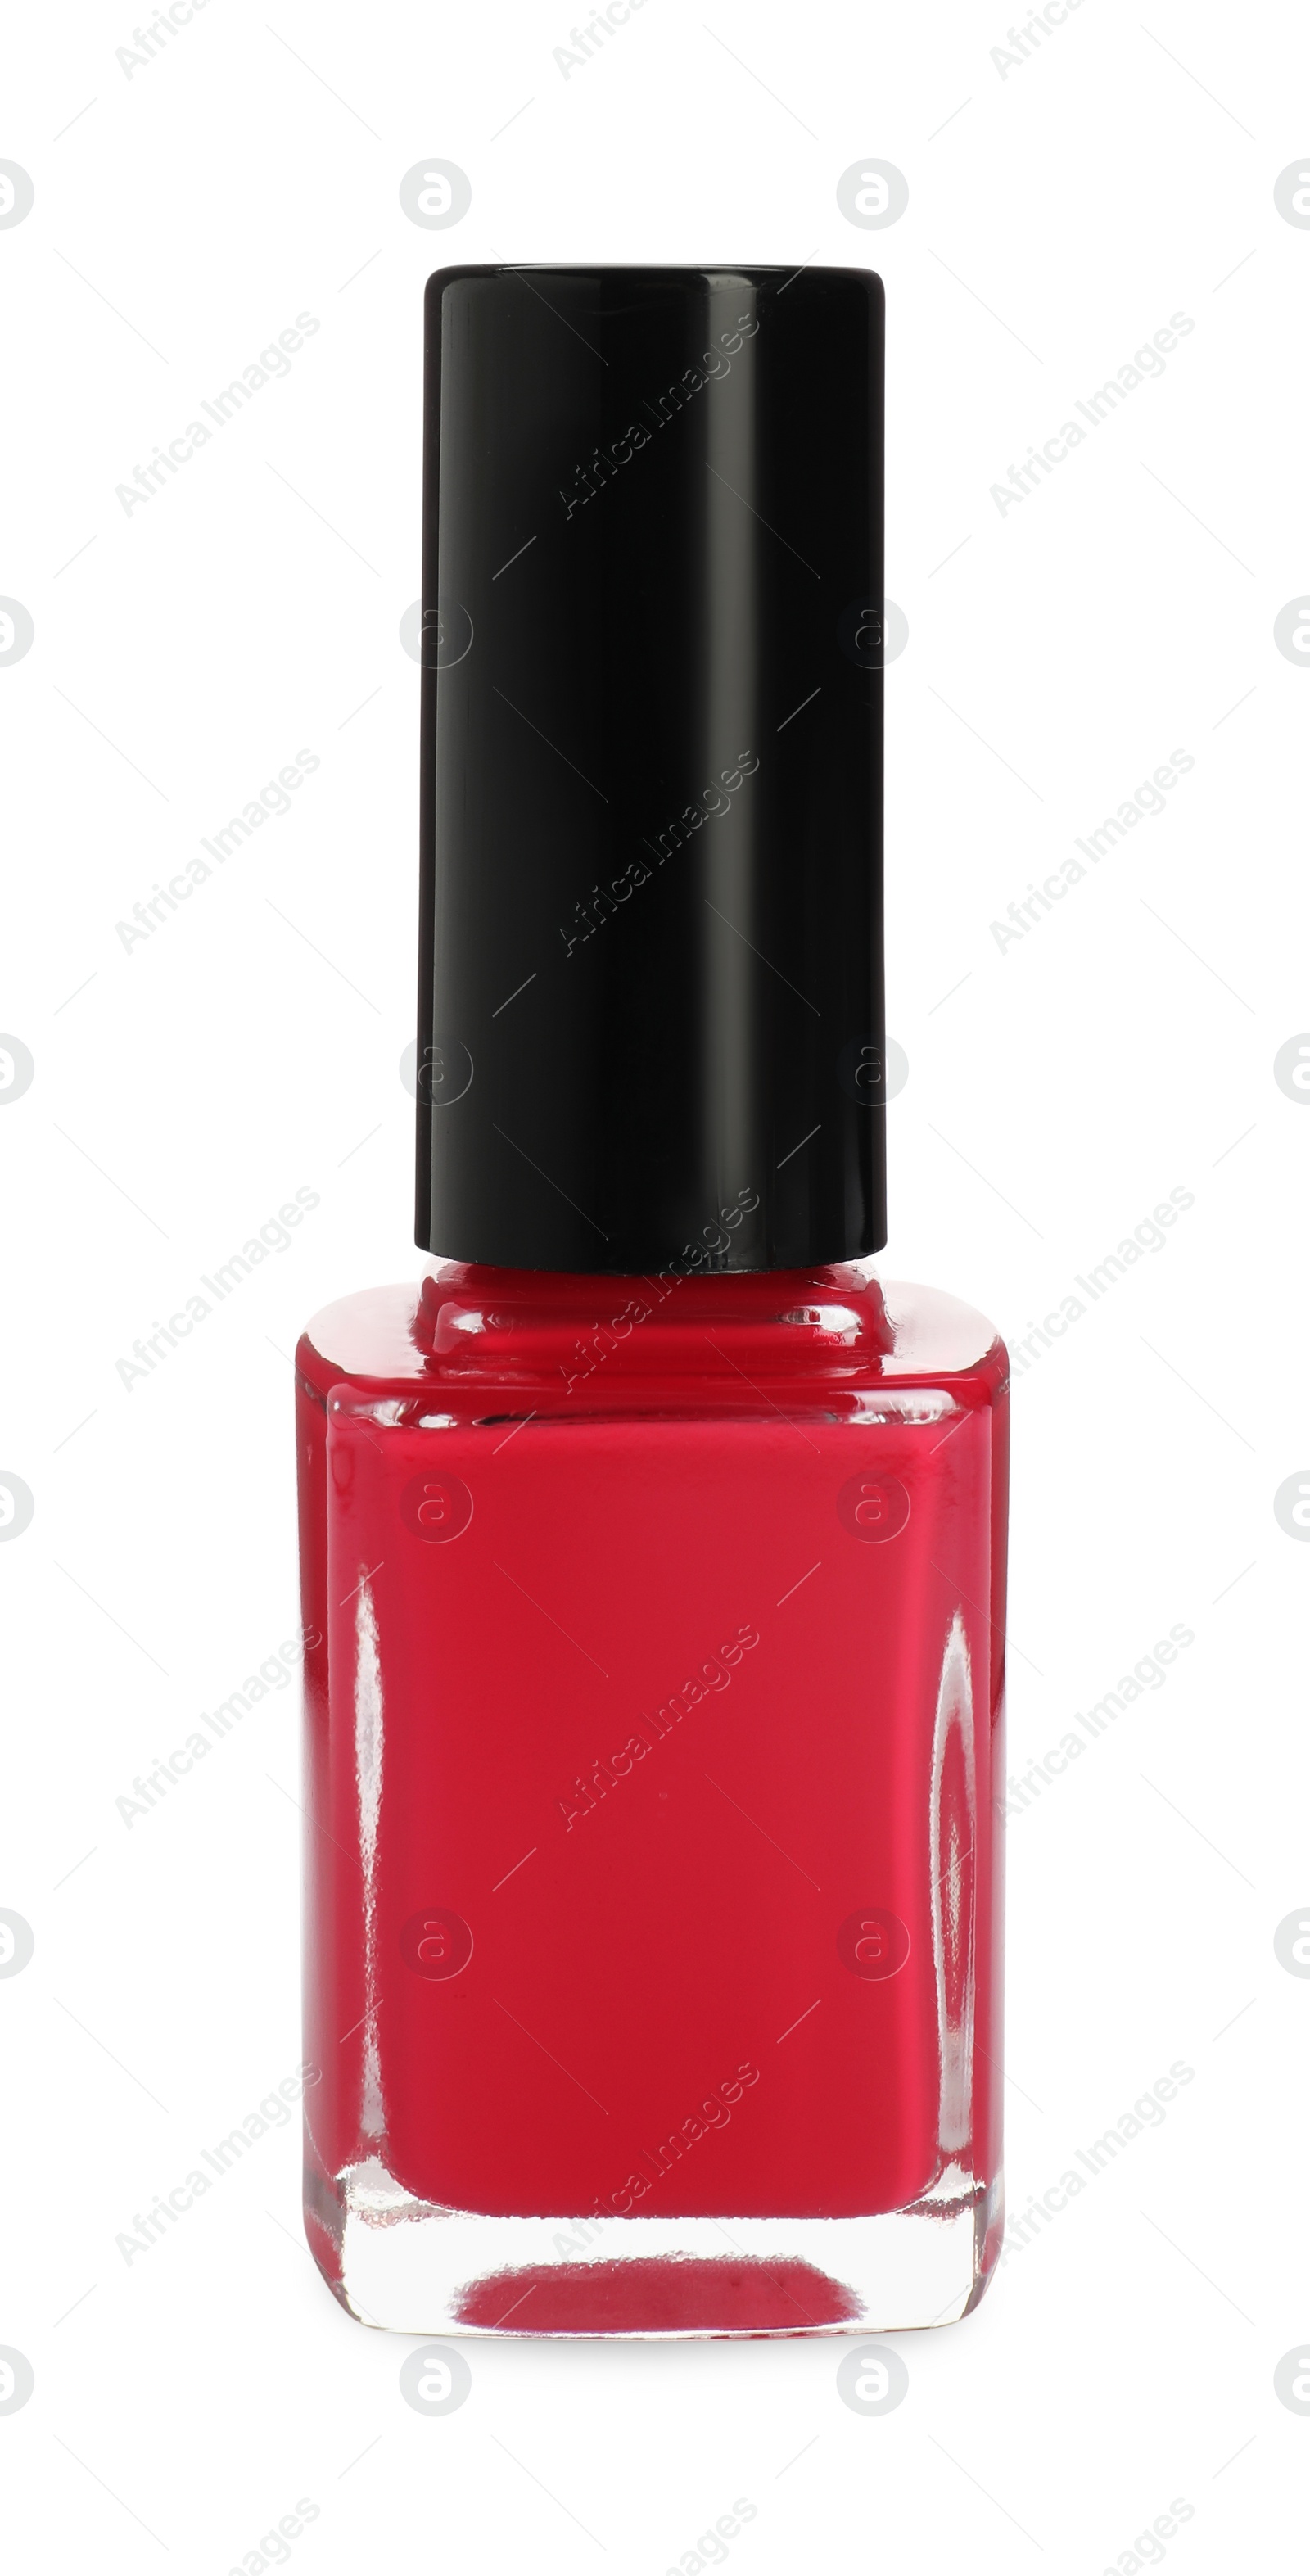 Photo of Red nail polish in bottle isolated on white